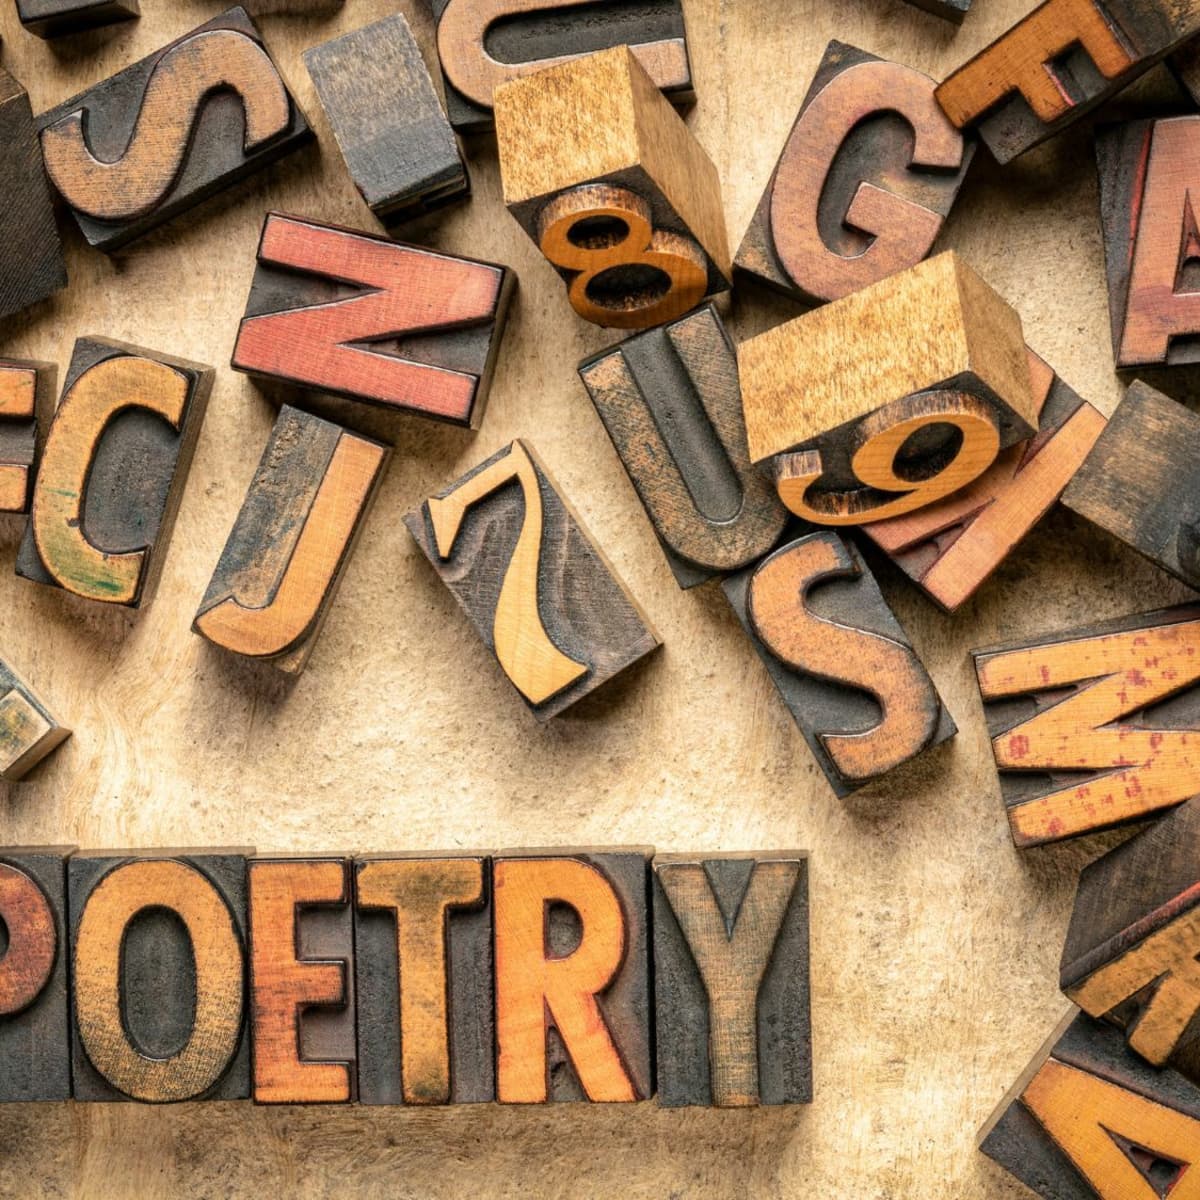 What Is Nonsense Poetry? - Owlcation